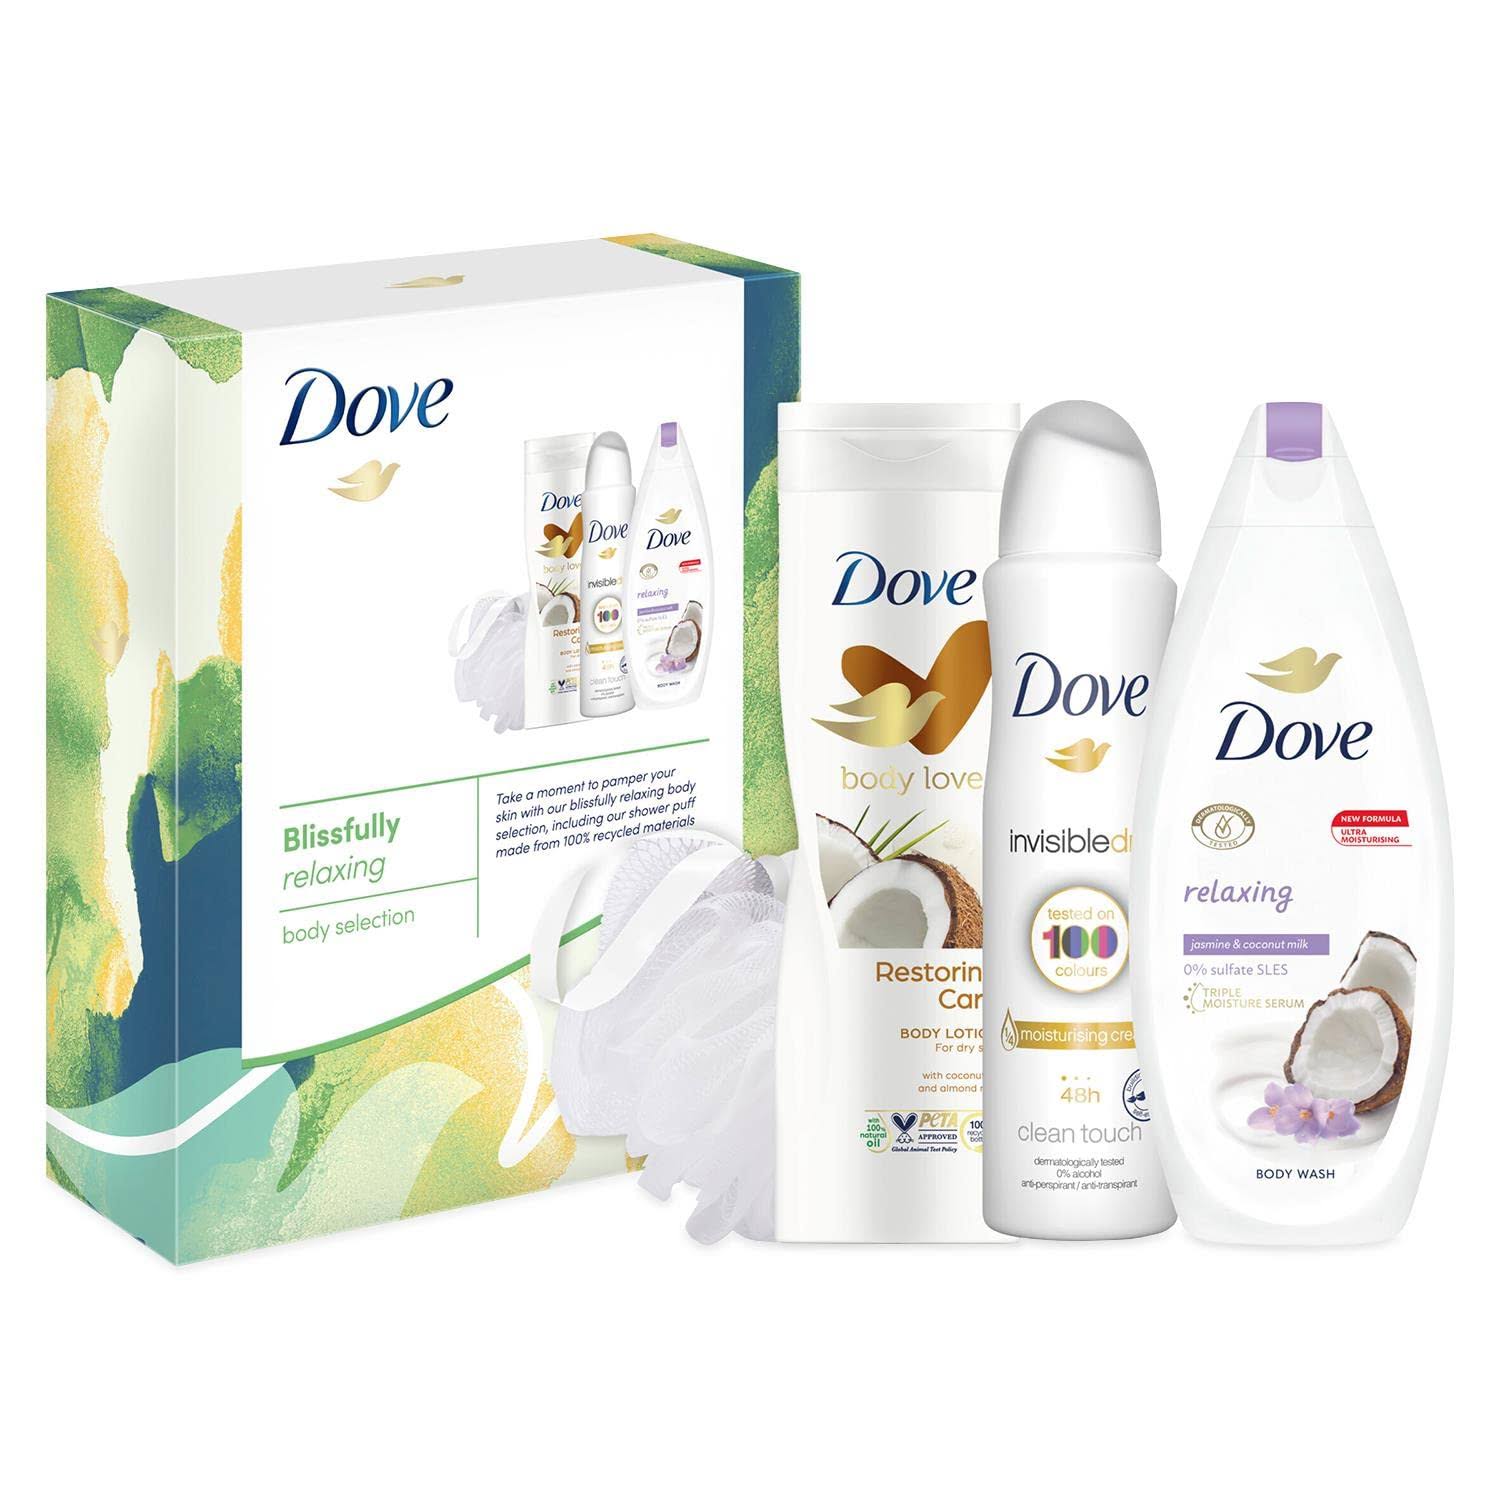 Dove - Blissfully Relaxing Body Selection Gift Set